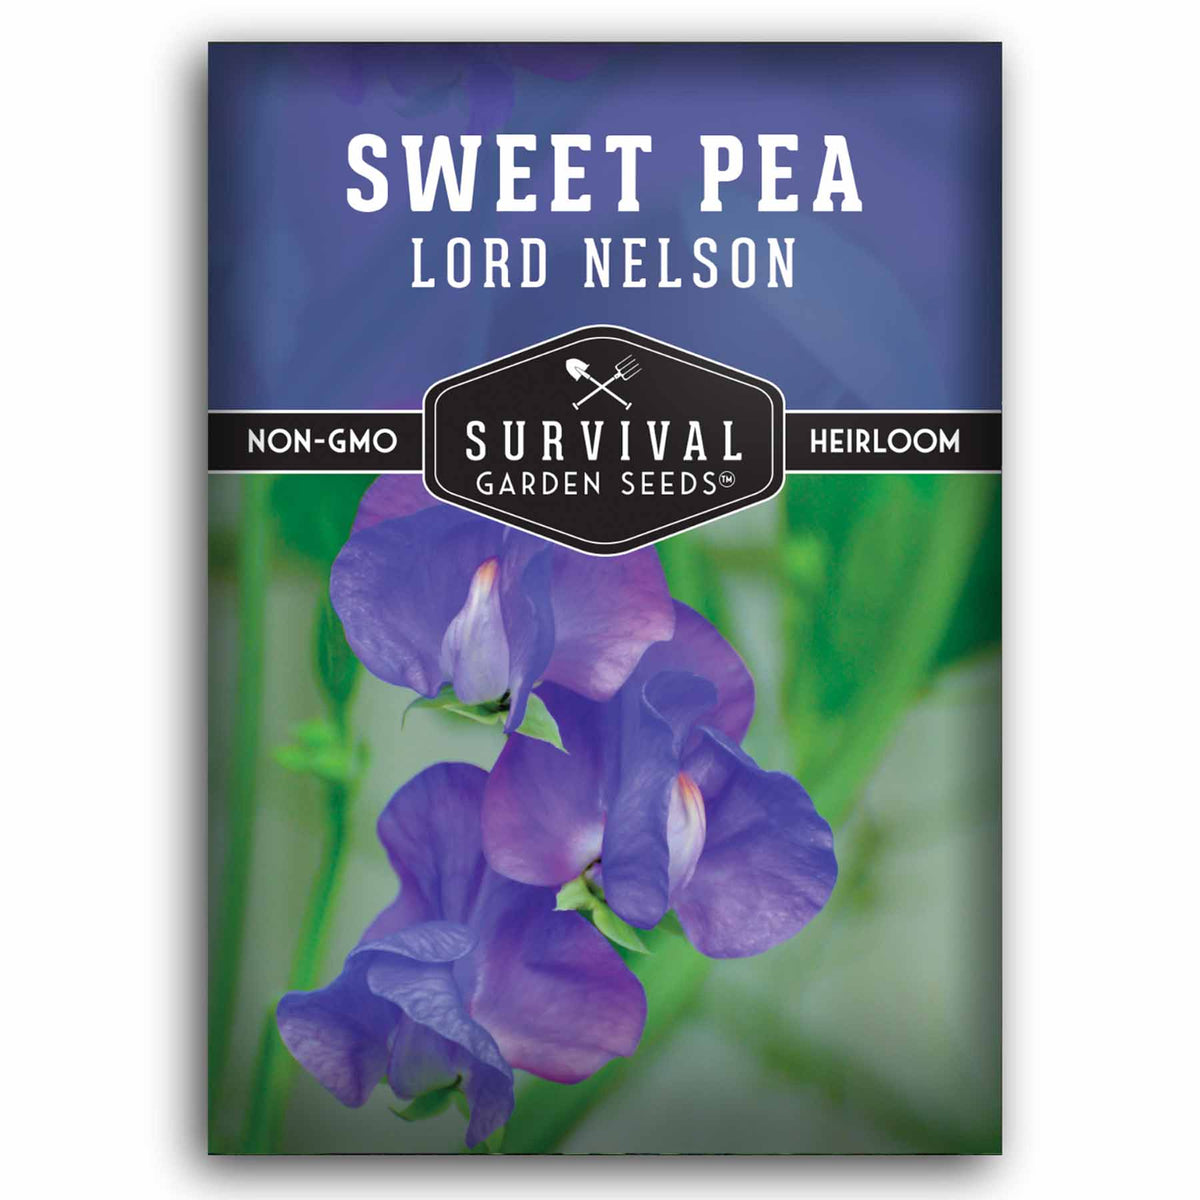 1 packet of Lord Nelson Sweet Pea seeds